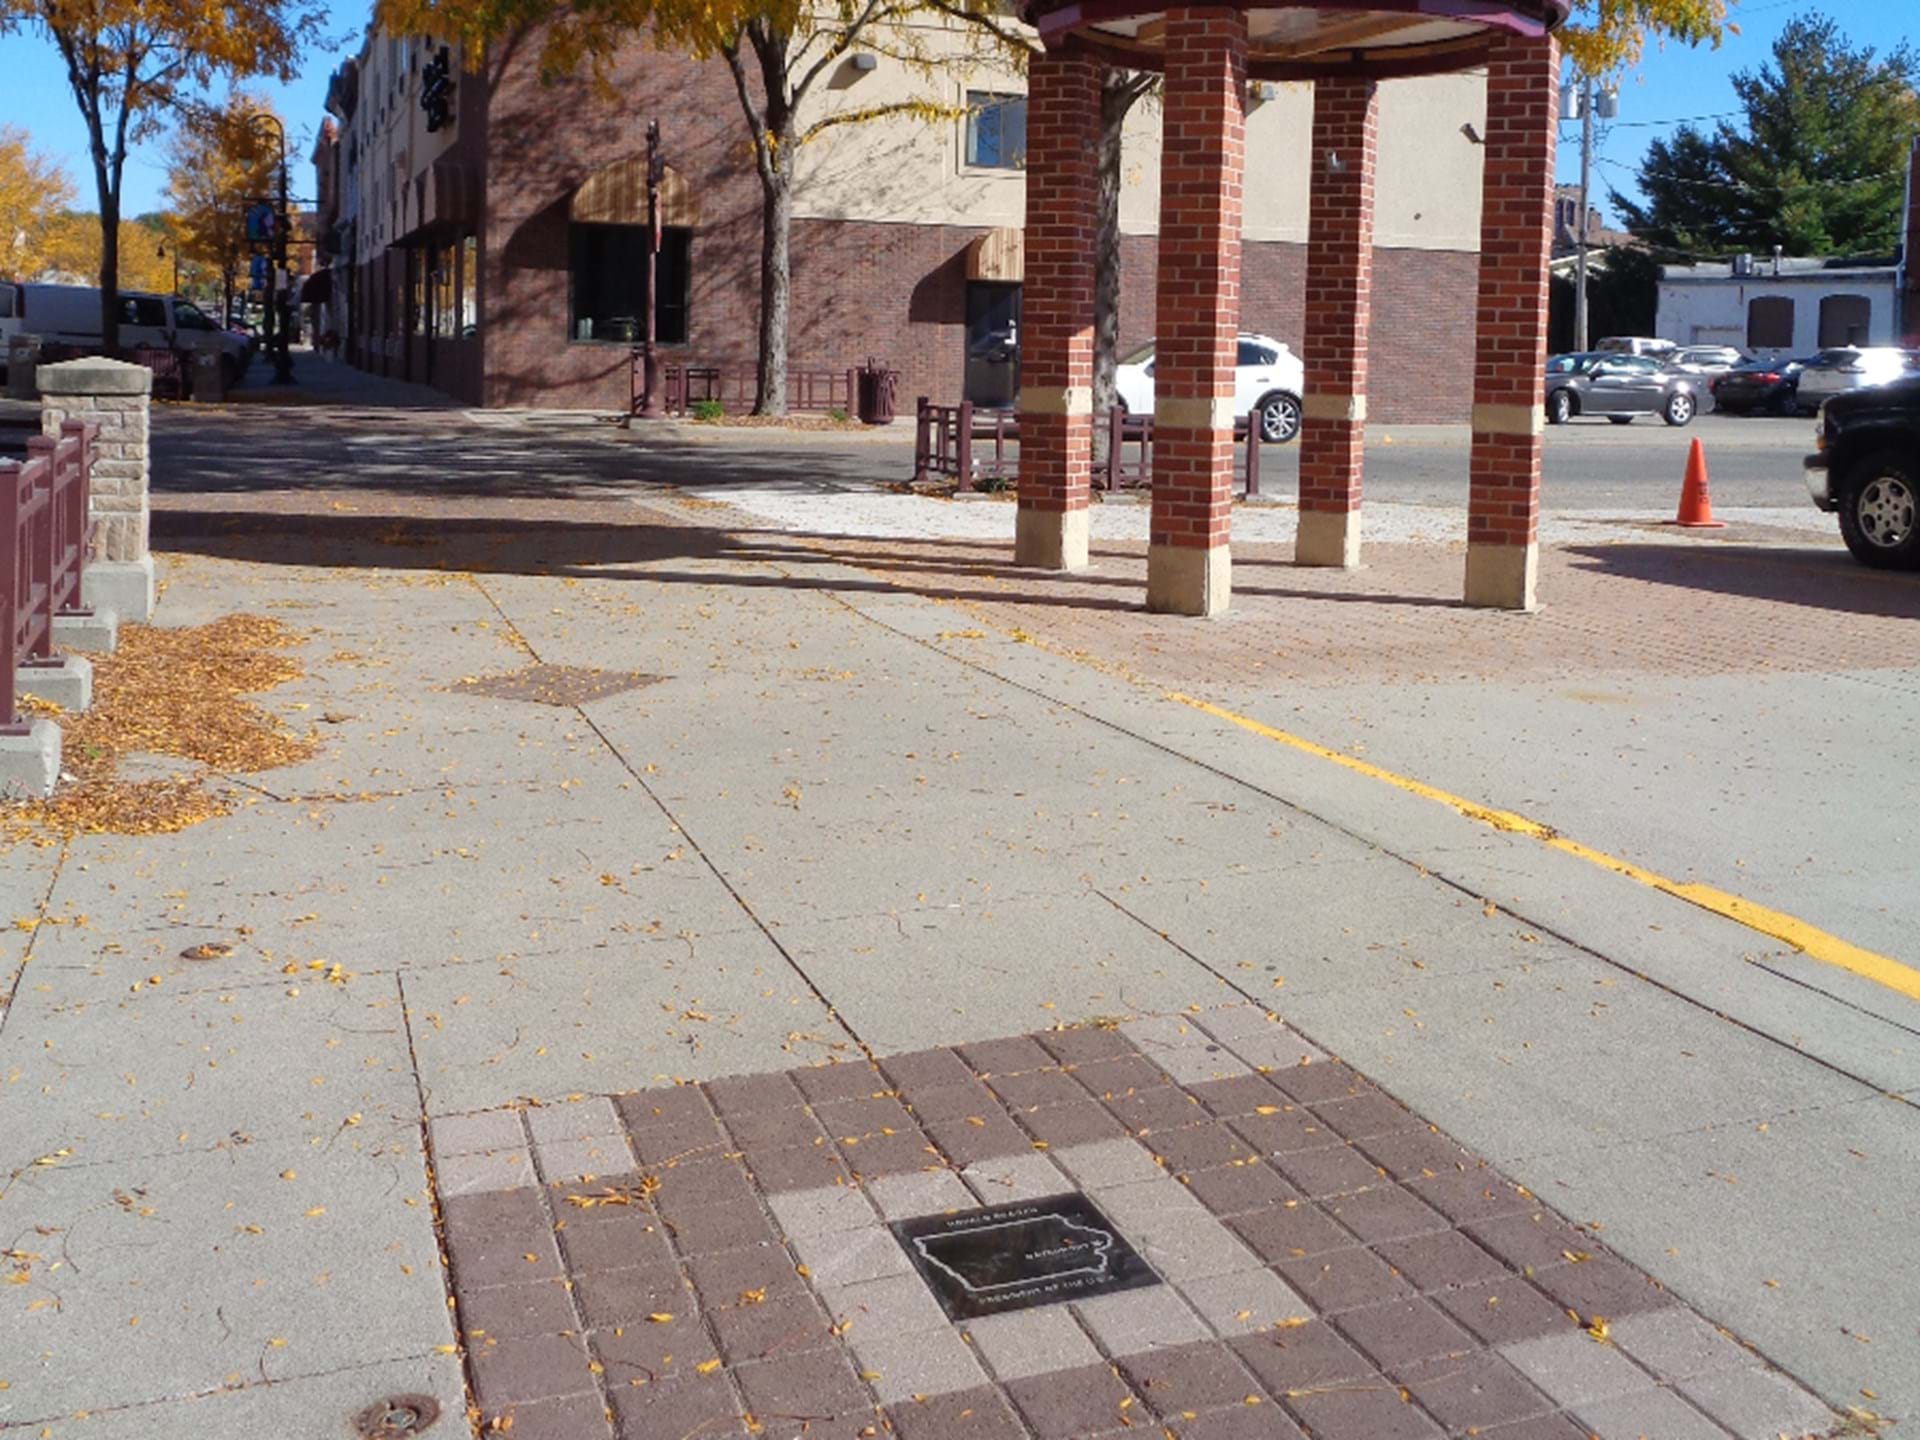 Iowa Walk of Fame Plaques line streets of downtown Shenandoah